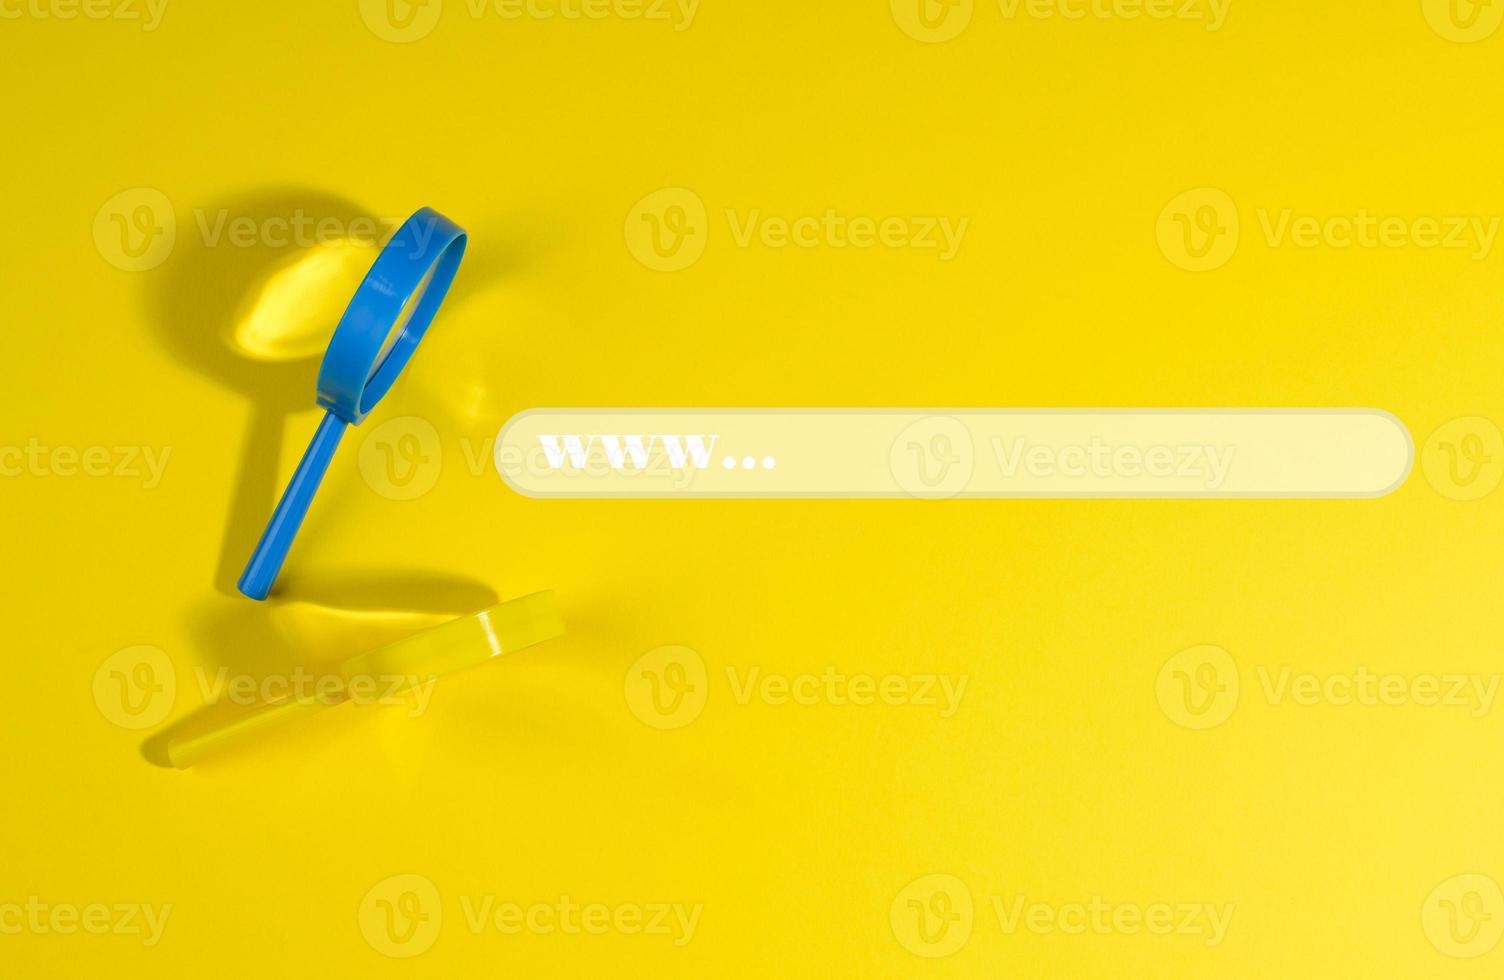 plastic magnifiers and a form for searching information on the Internet photo